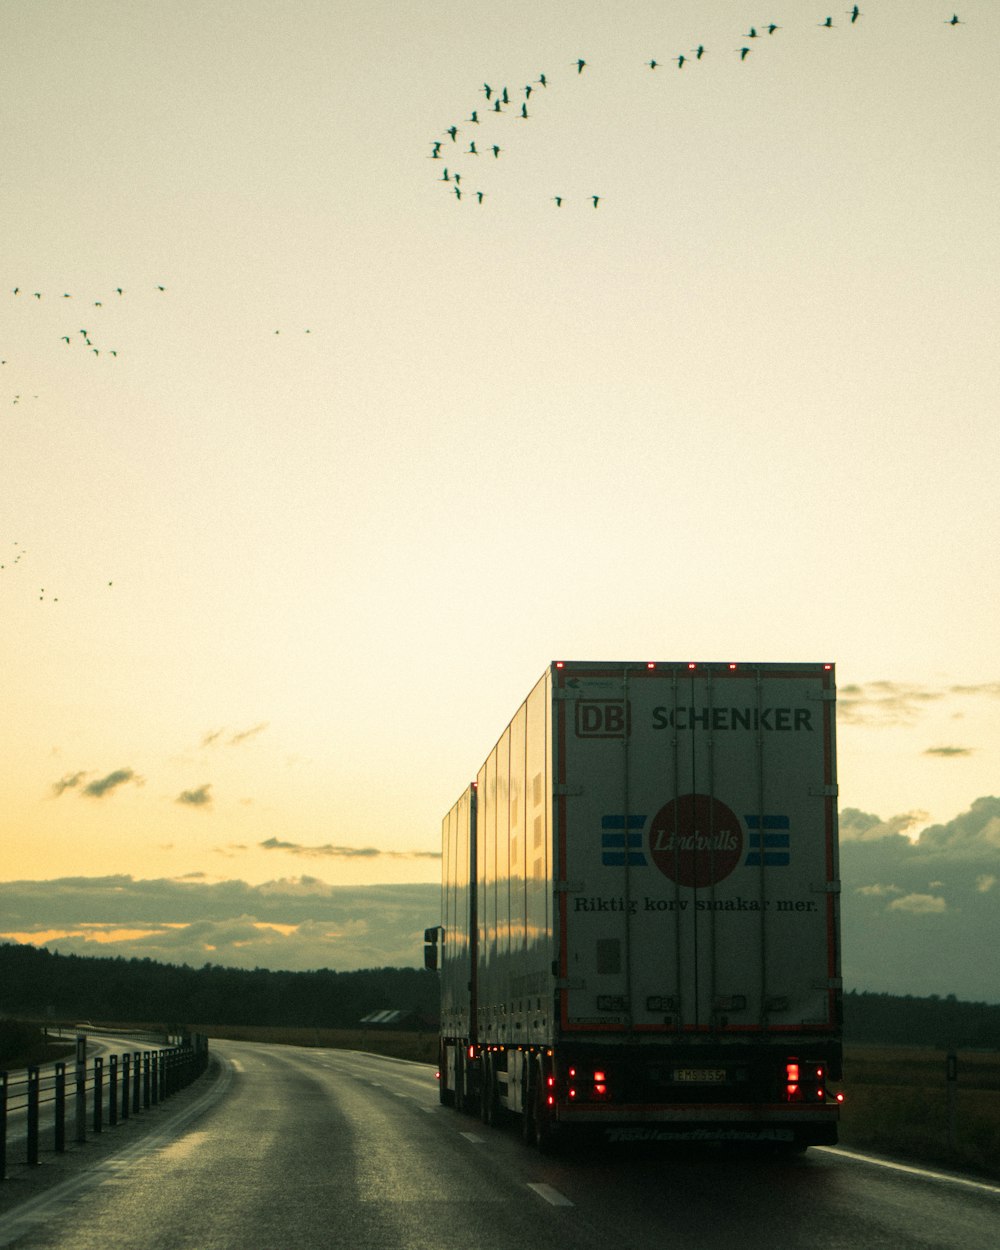 a semi truck driving down a road at sunset